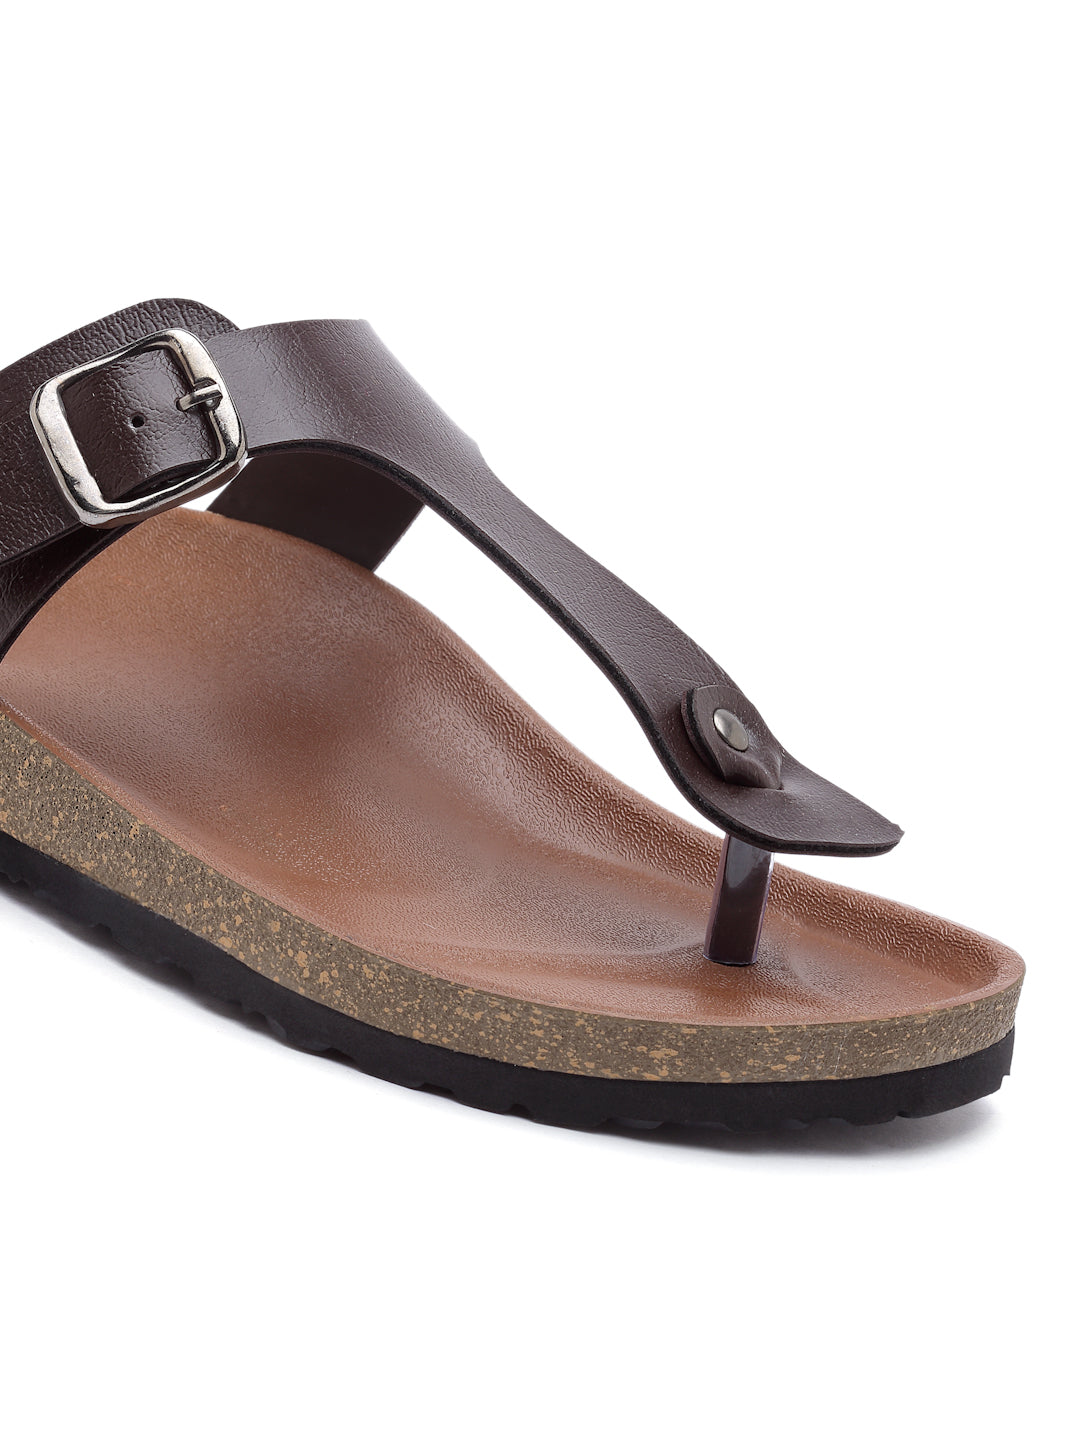 Women's Outdoor Stylish Brown Synthetic Leather Casual Sandal